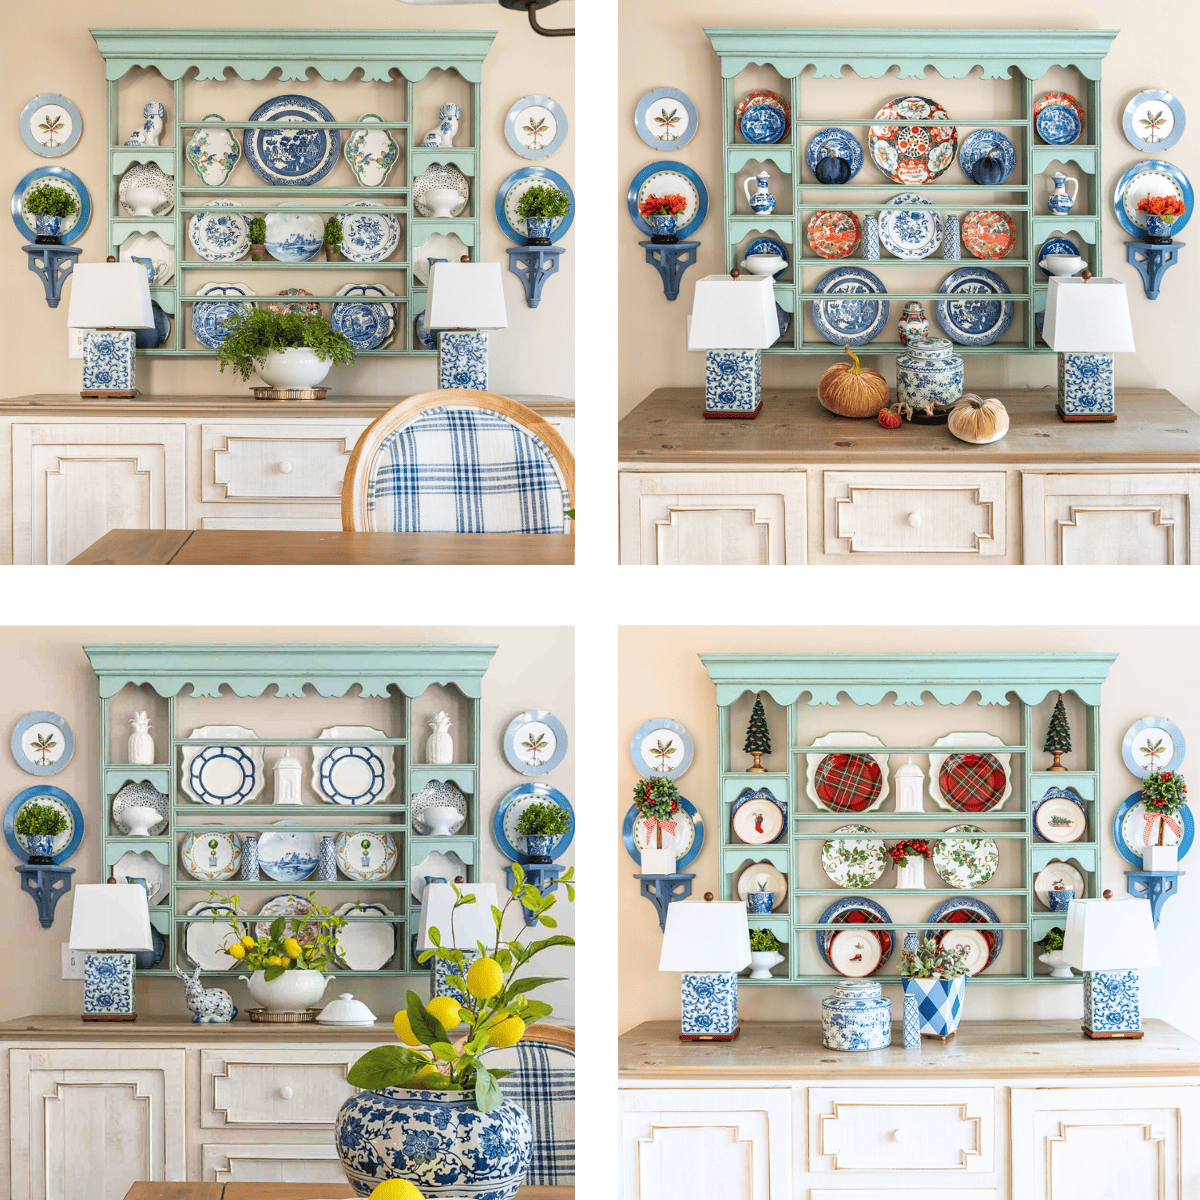 4 Examples of how to display decorative dishes on a plate rack for different holidays and seasons